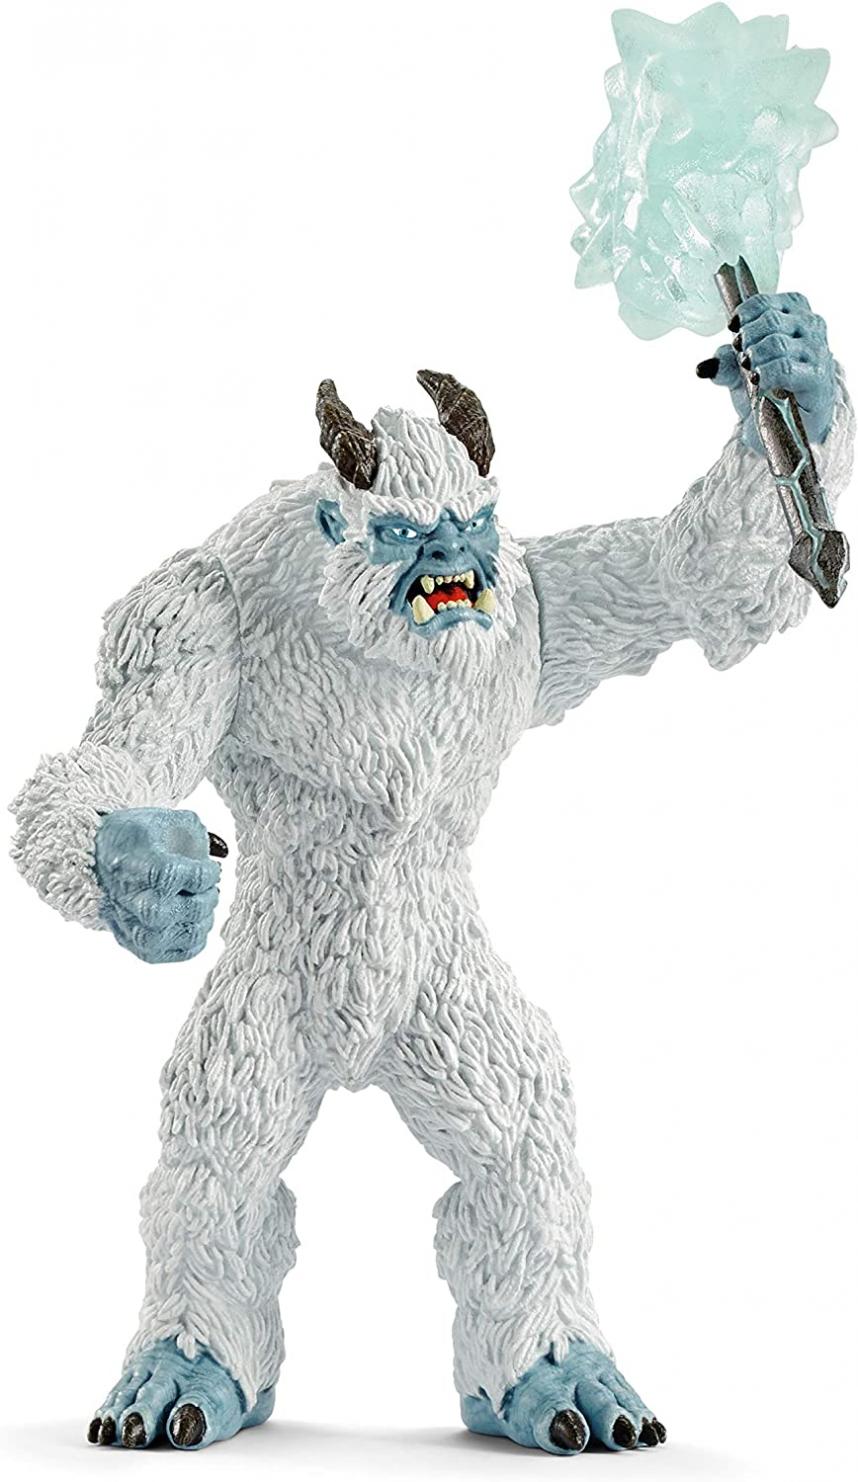 Schleich Eldrador, Eldrador Creatures, Action Figures for Boys and Girls 7-12 years old, Ice Monster with Weapon